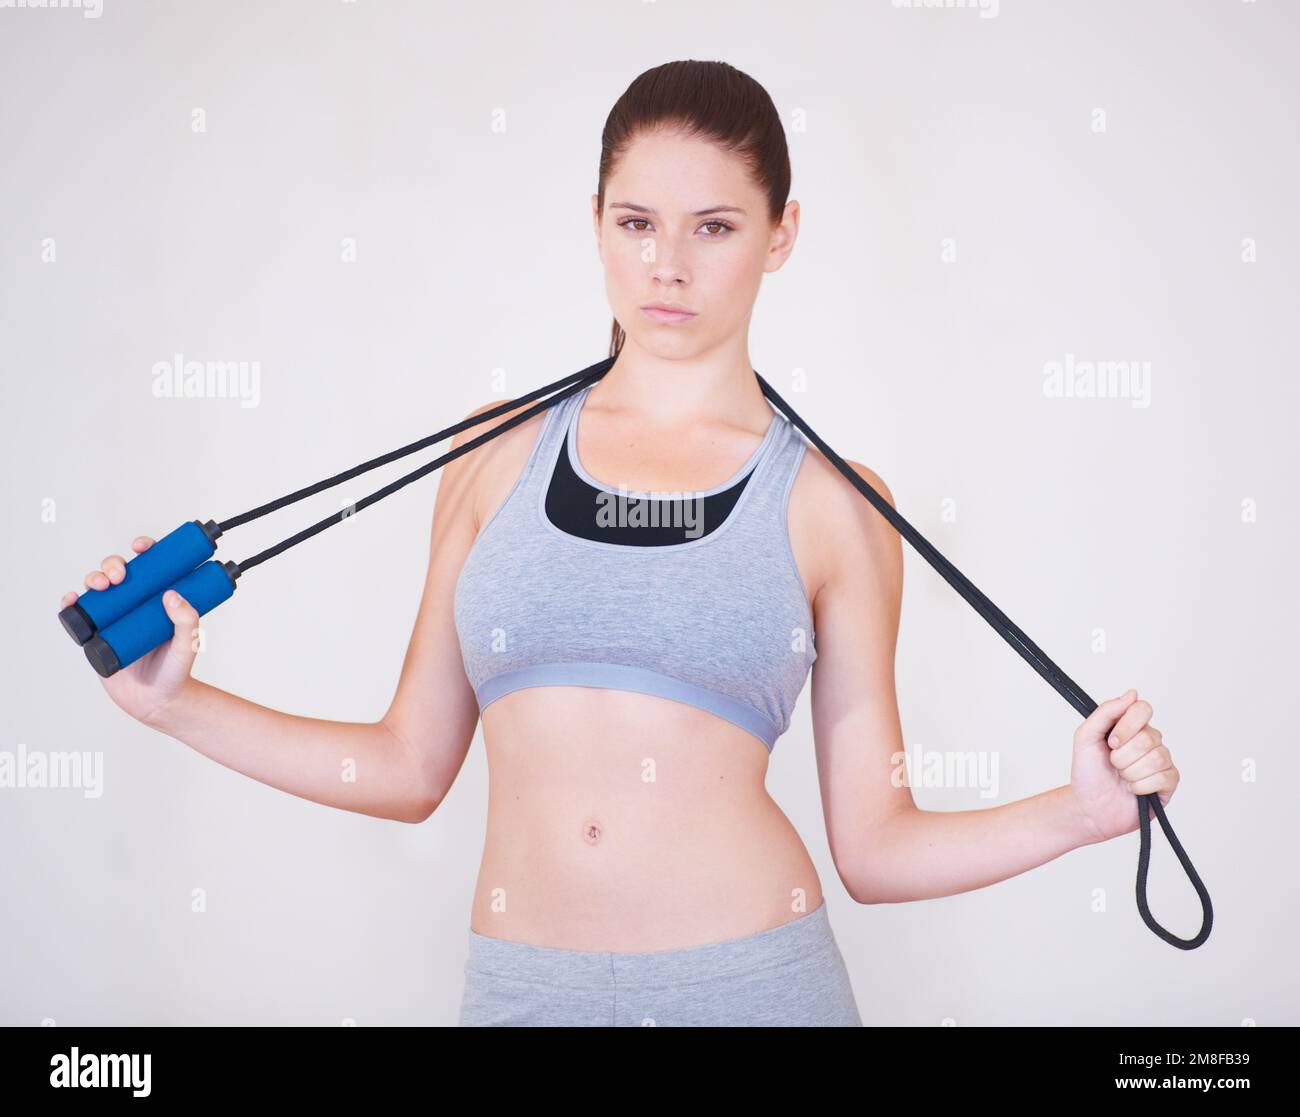 Serious about skipping. Portrait of a serious-looking young woman holding a skipping rope over her shoulders. Stock Photo